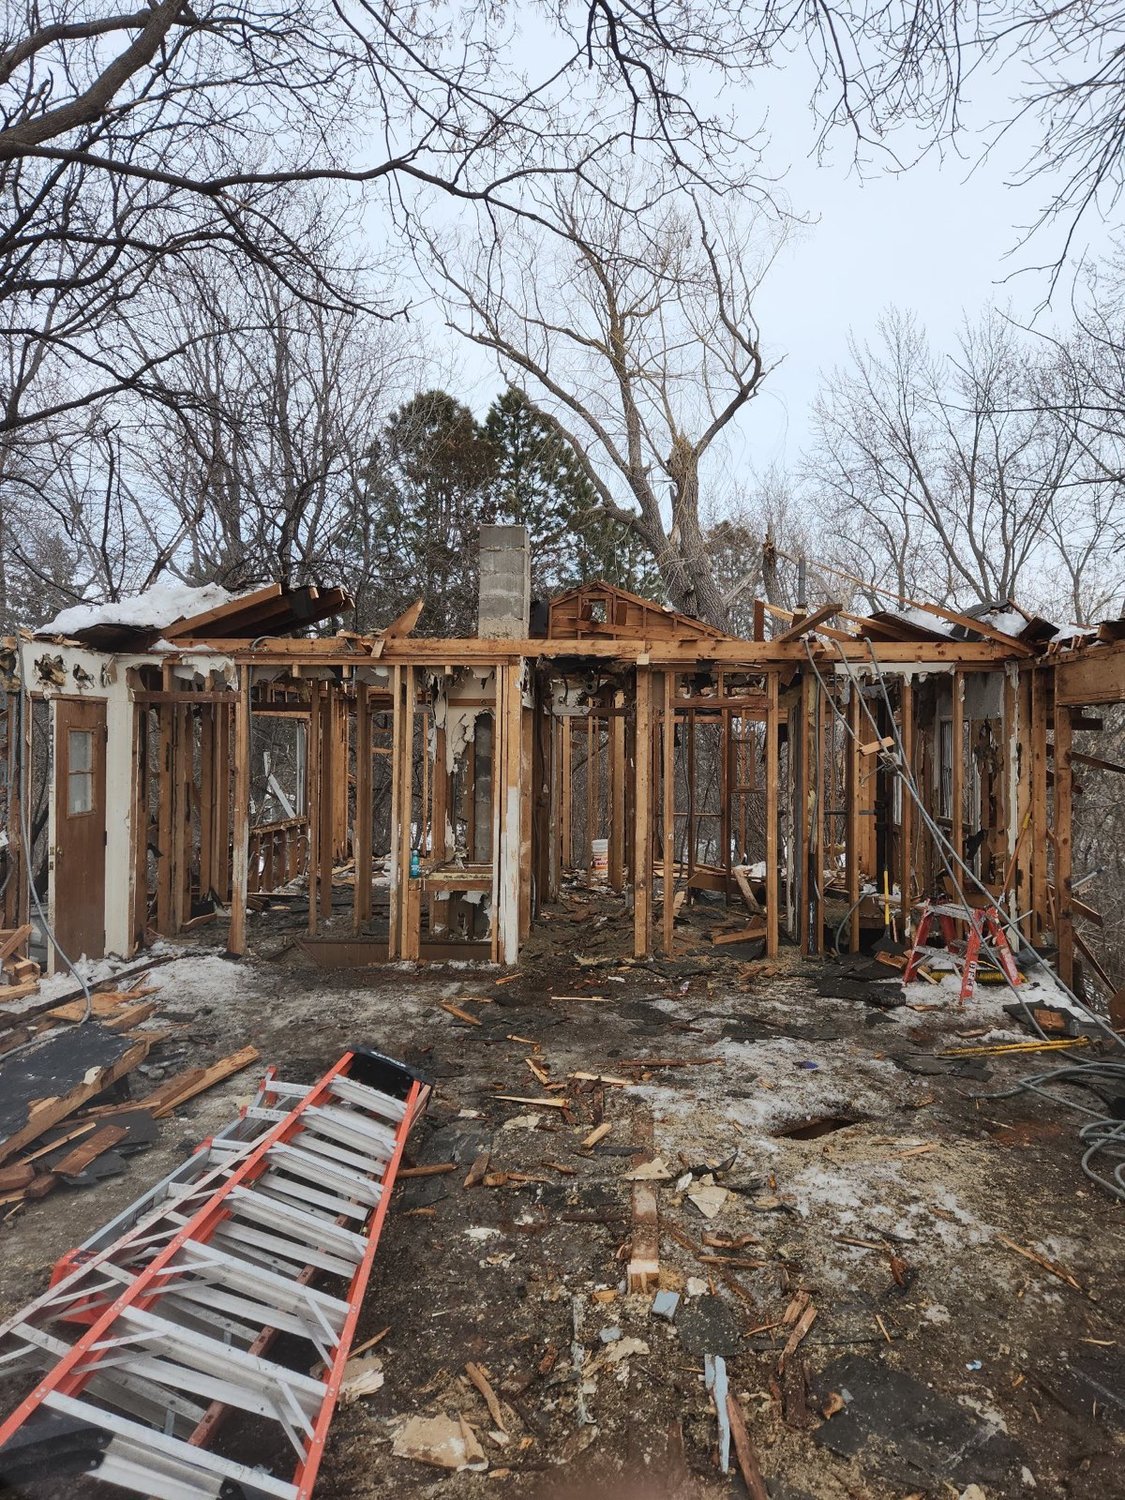 The Baker-Rowland site, owned by the city of Minnetonka, is being deconstructed. (Photo submitted)